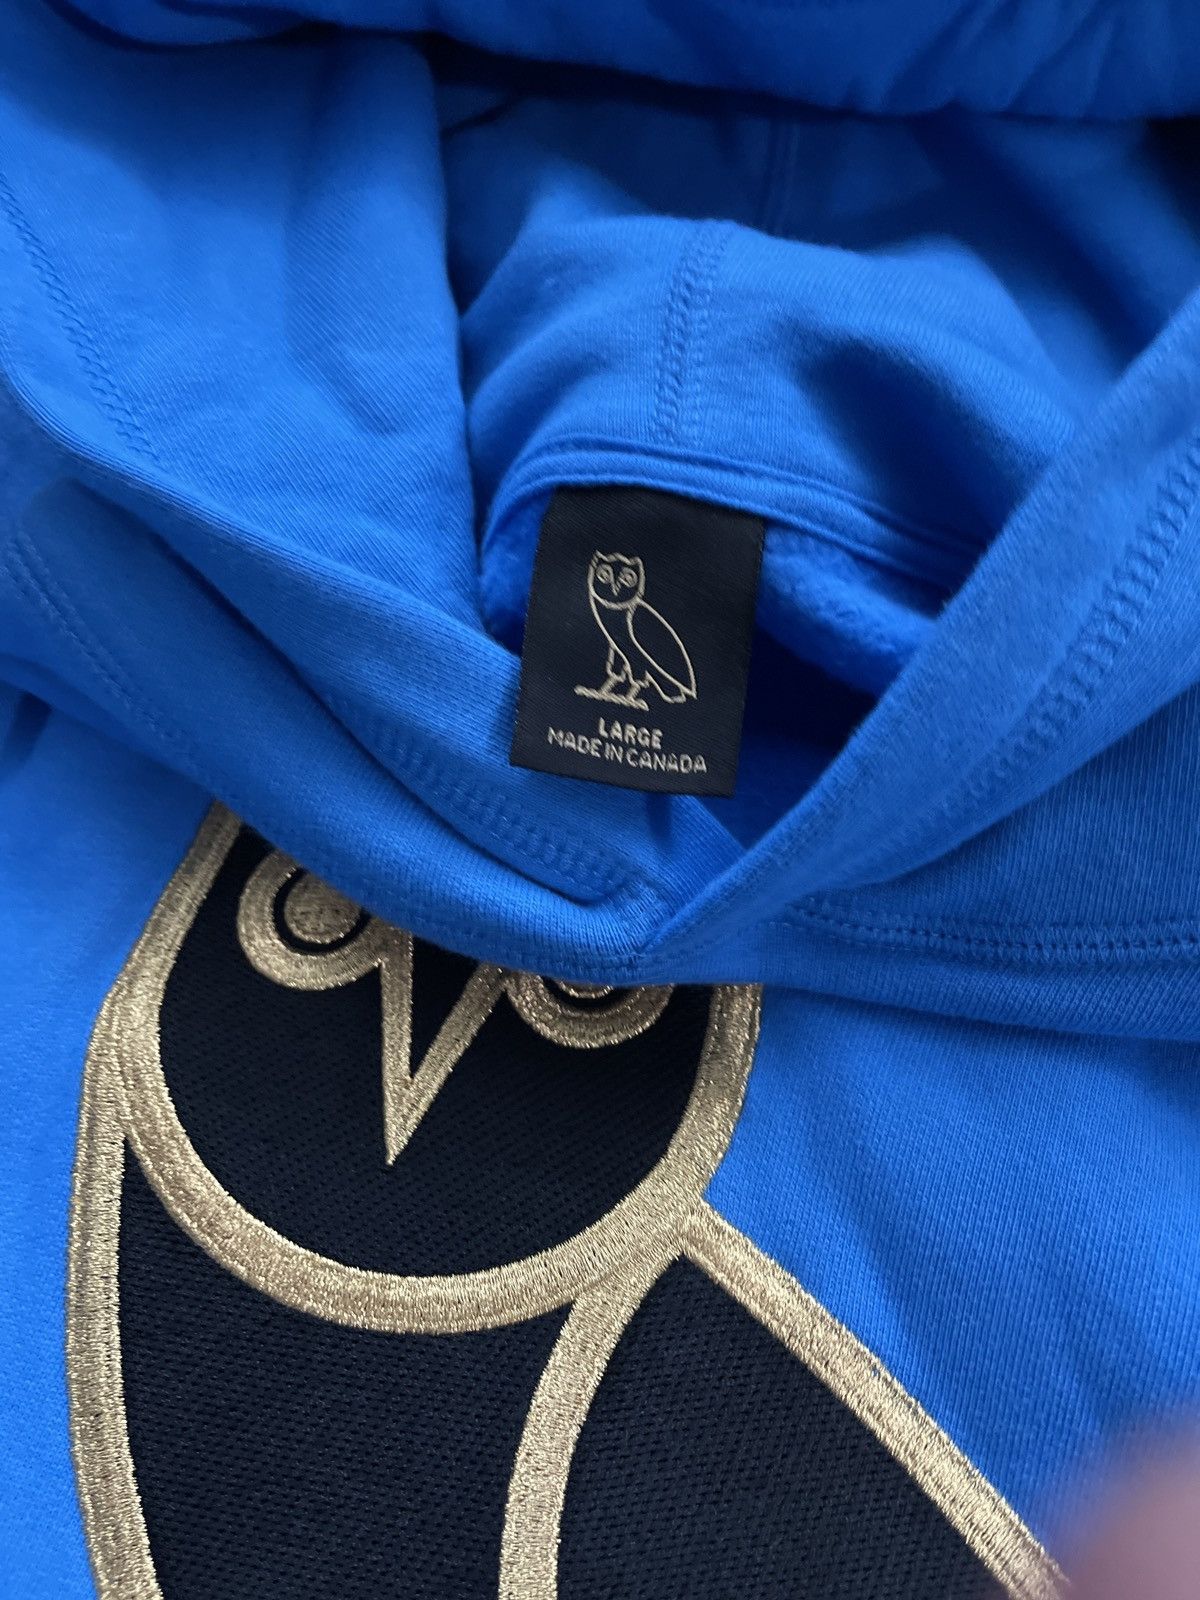 Octobers Very Own OVO Classic Owl Hoodie Bright Blue Sz L Preowned Size US L / EU 52-54 / 3 - 3 Thumbnail